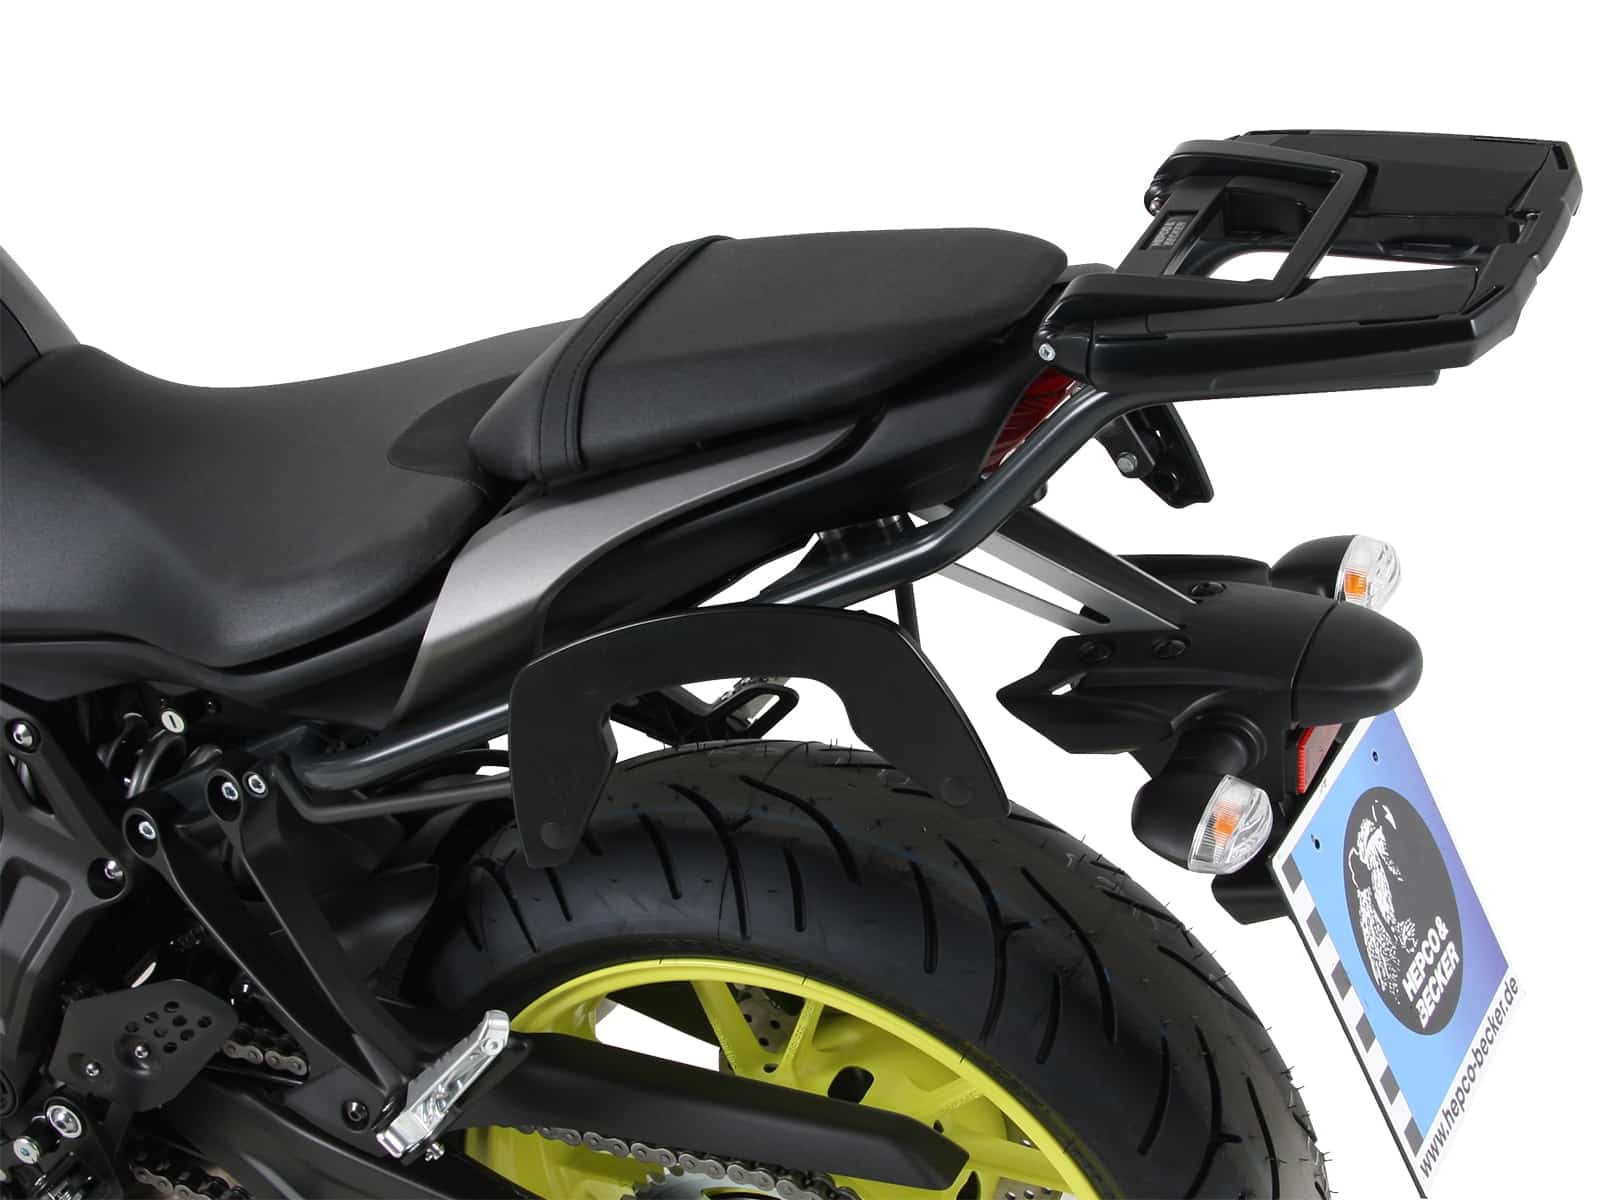 C-Bow sidecarrier for Yamaha MT-07 (2018-2020)